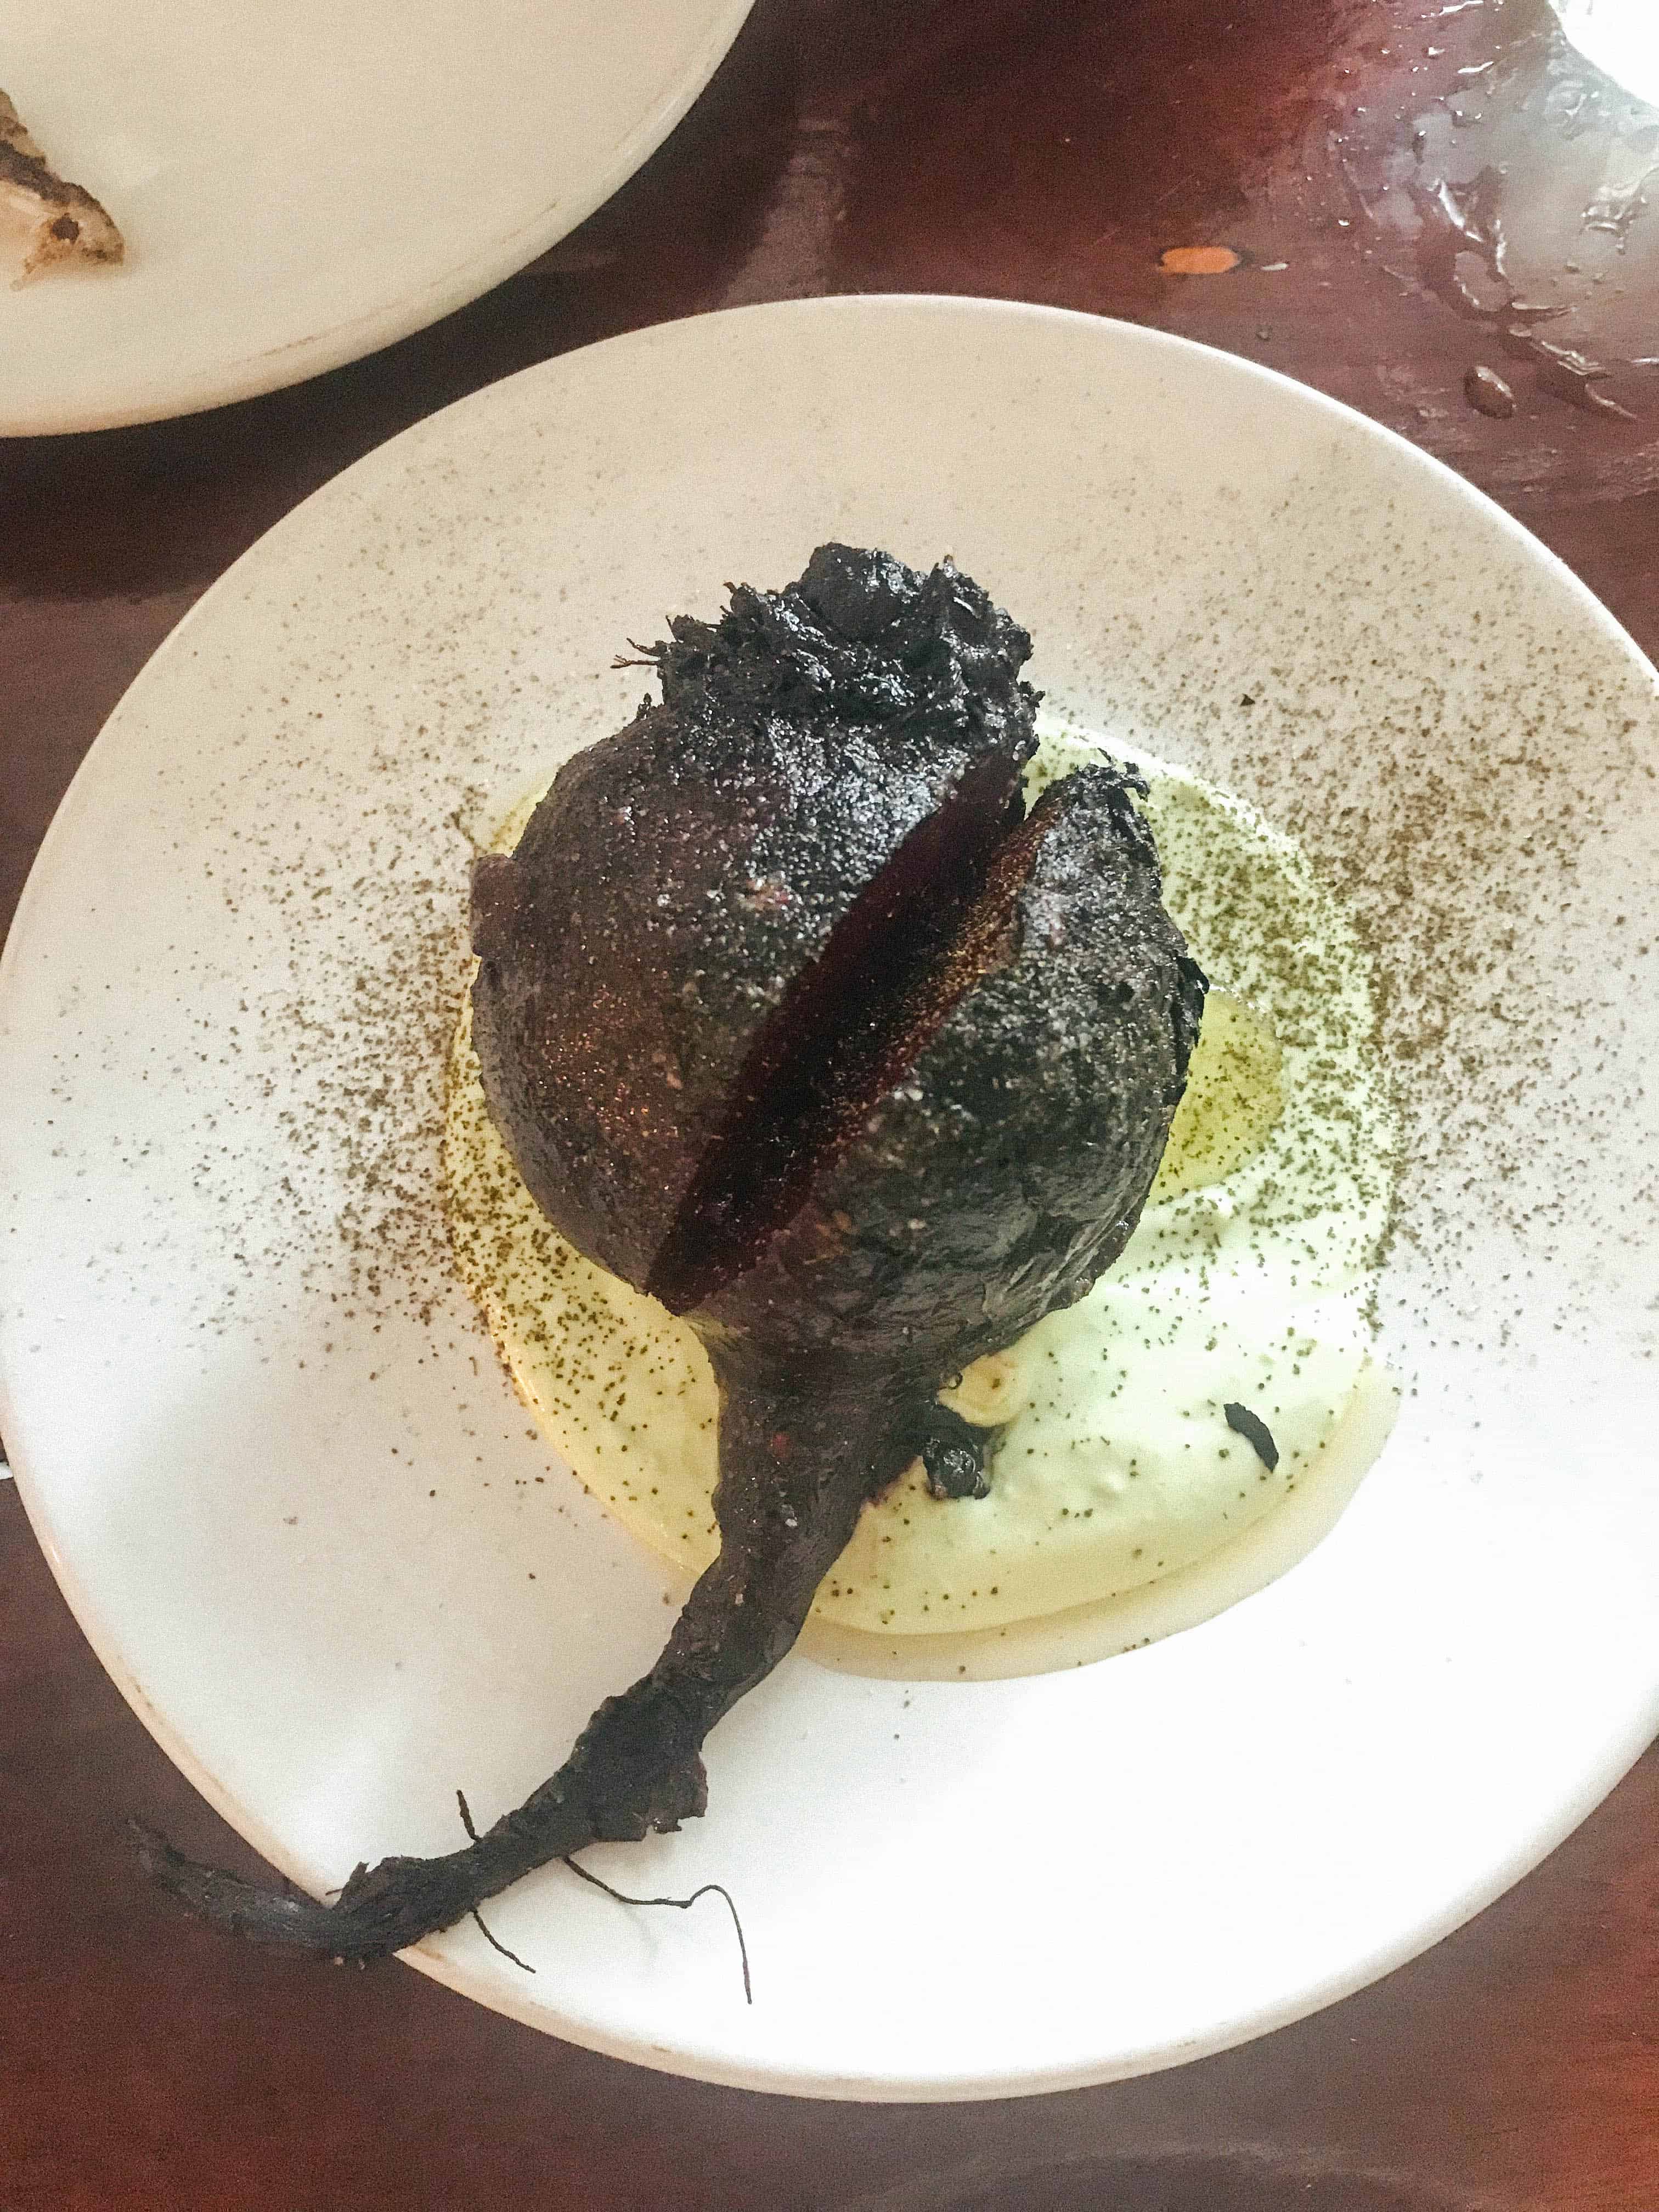 Single roasted beet on a white dinner plate.